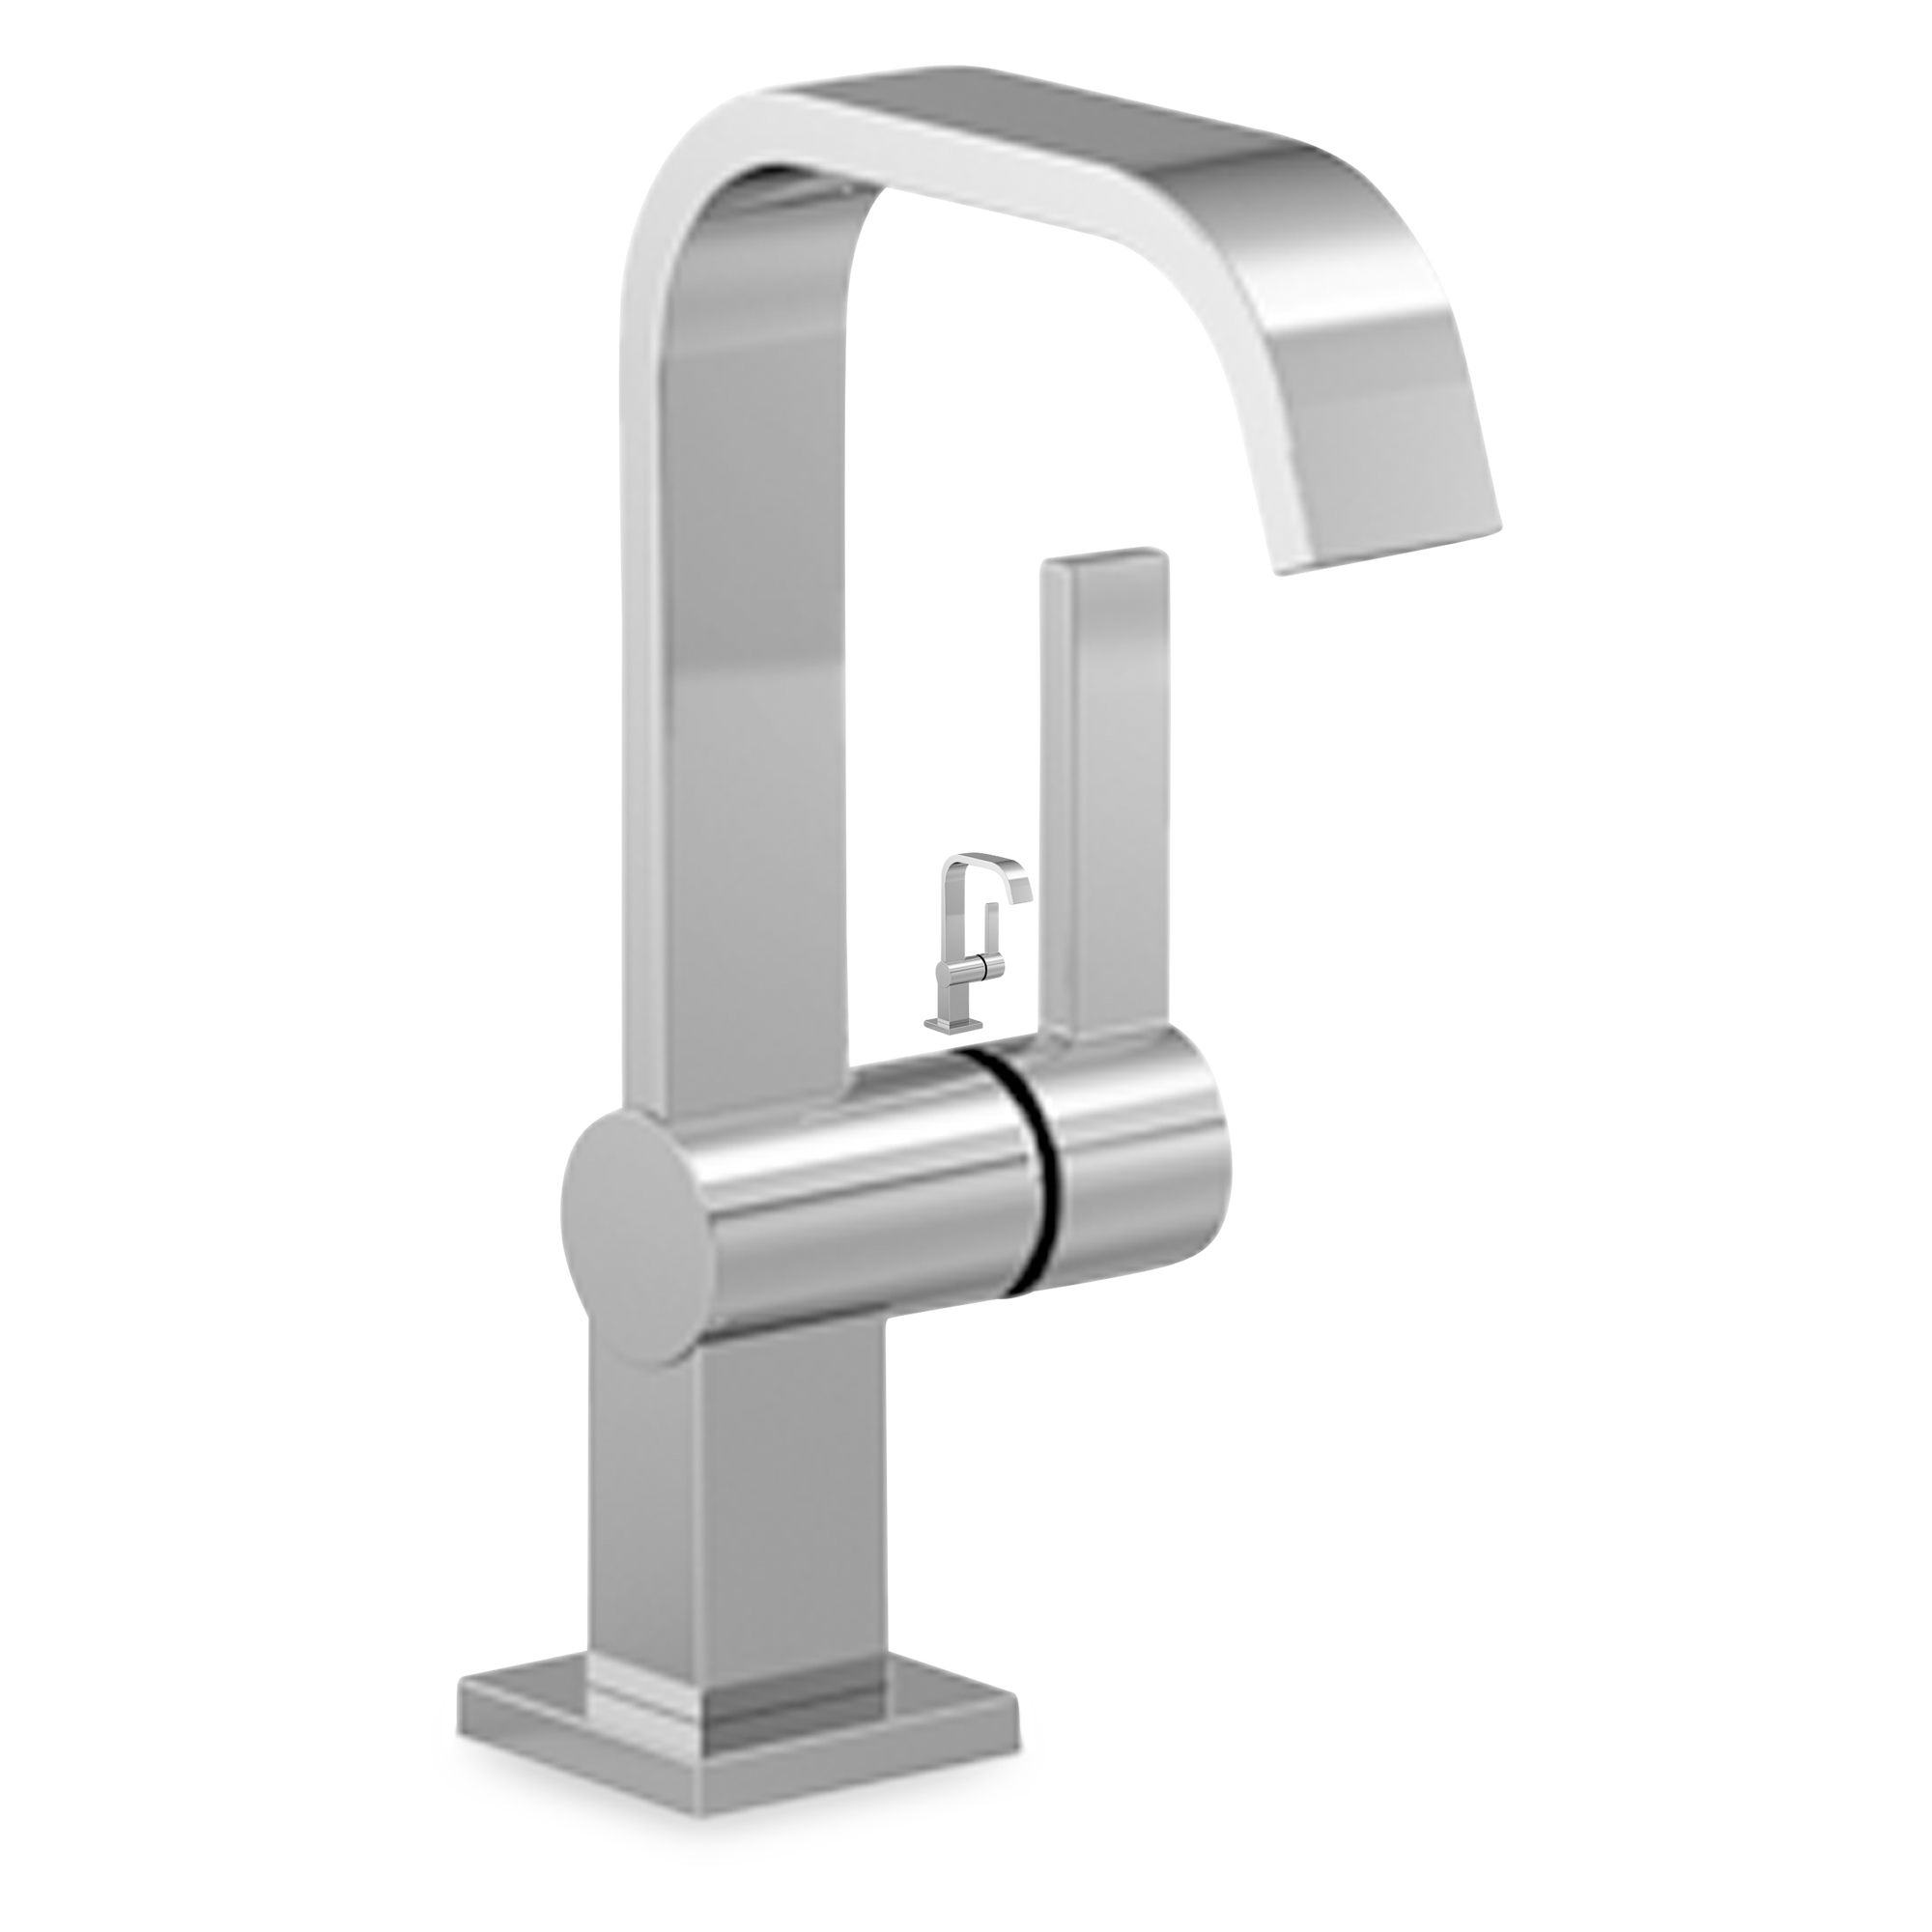 A sleek and structurally defined faucet to elevate any modern kitchen décor.